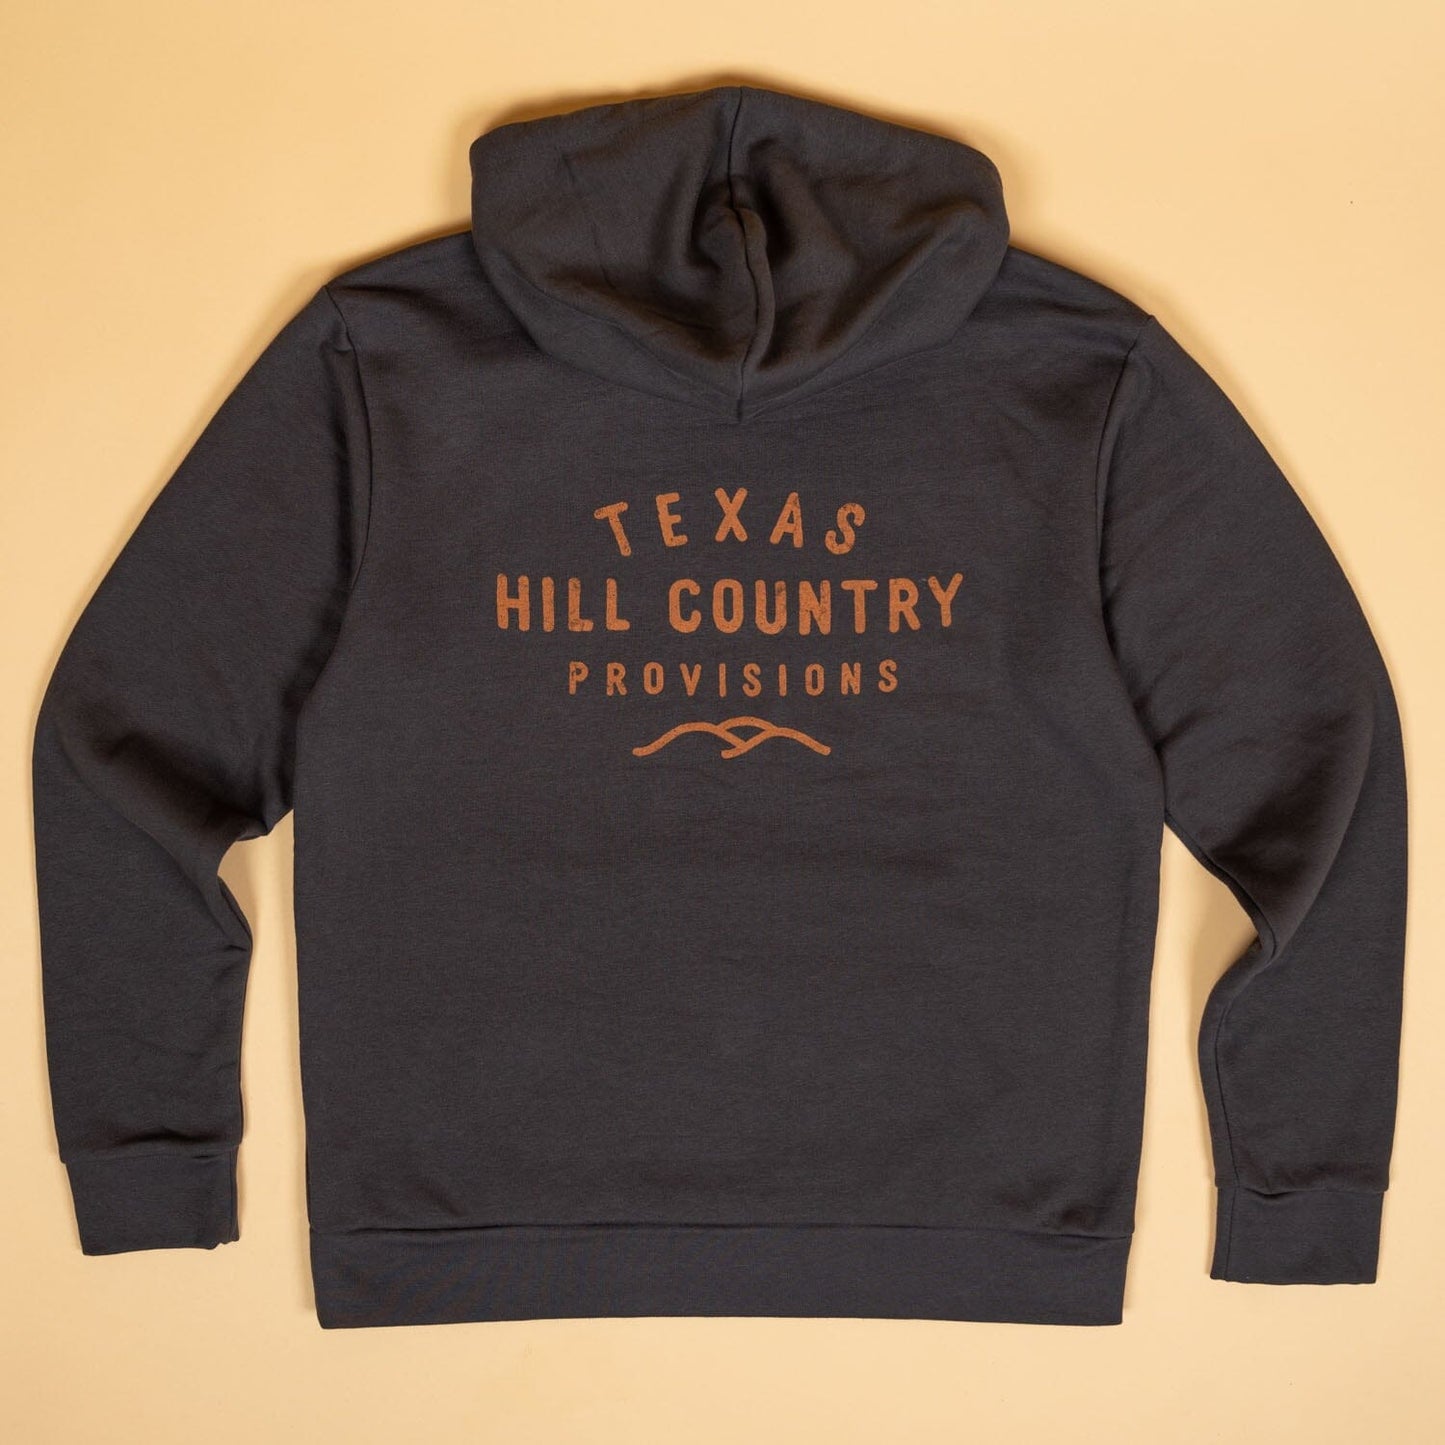 THC v1 Campfire Hoodie Texas Hill Country Provisions Faded Black S 